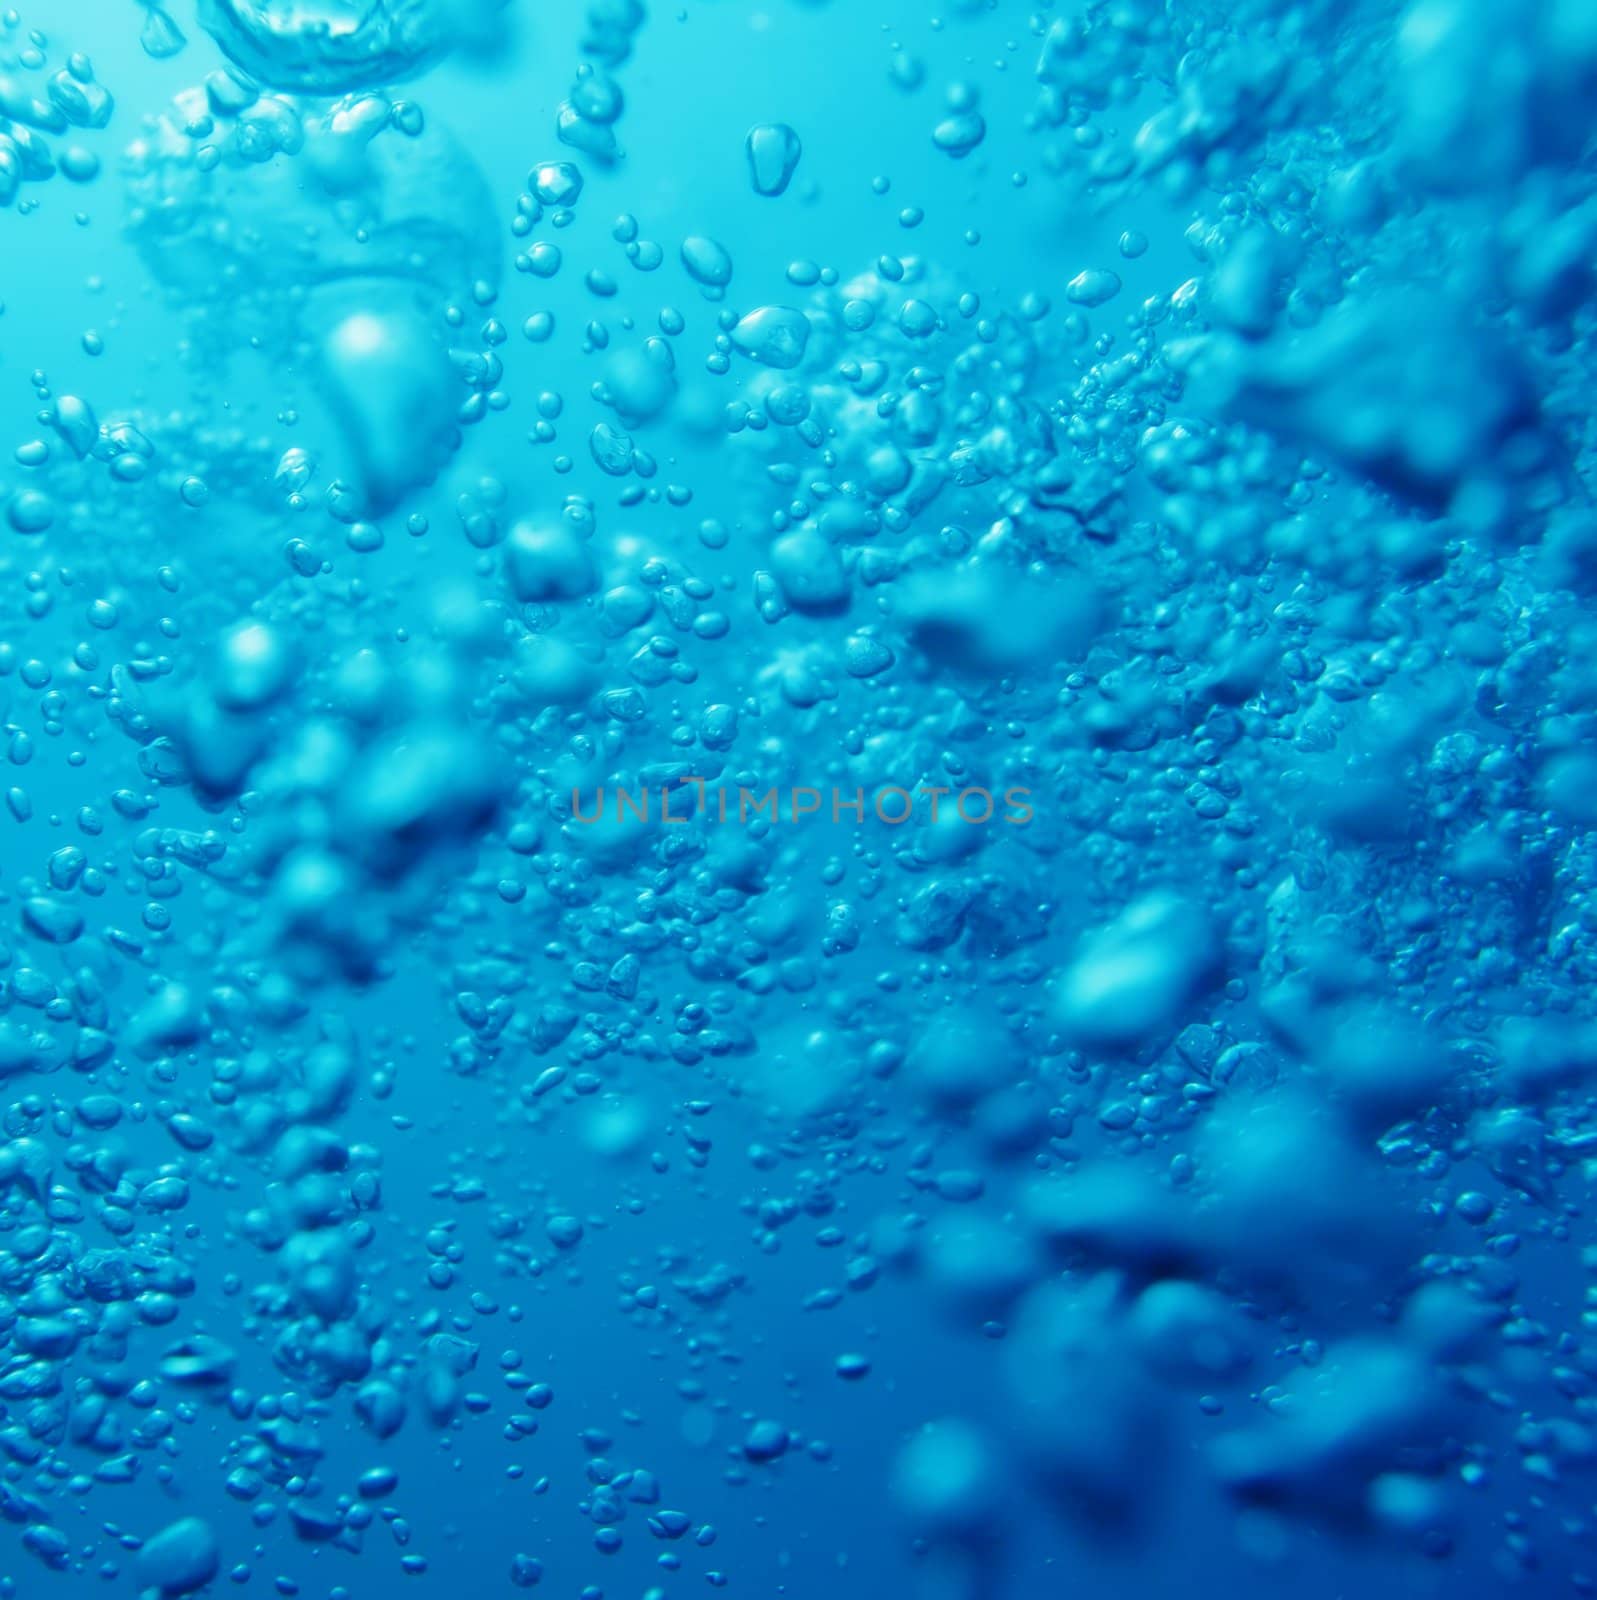 air bubbles in fresh water nice for backgrounds